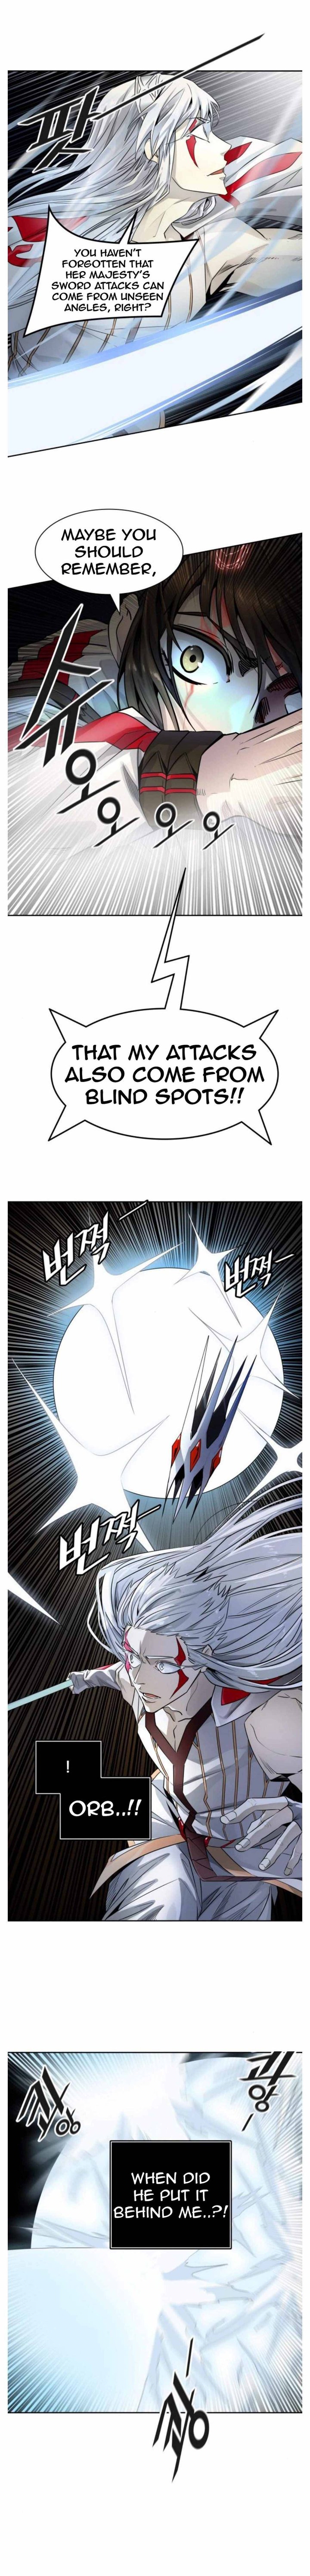 Tower Of God 504 22